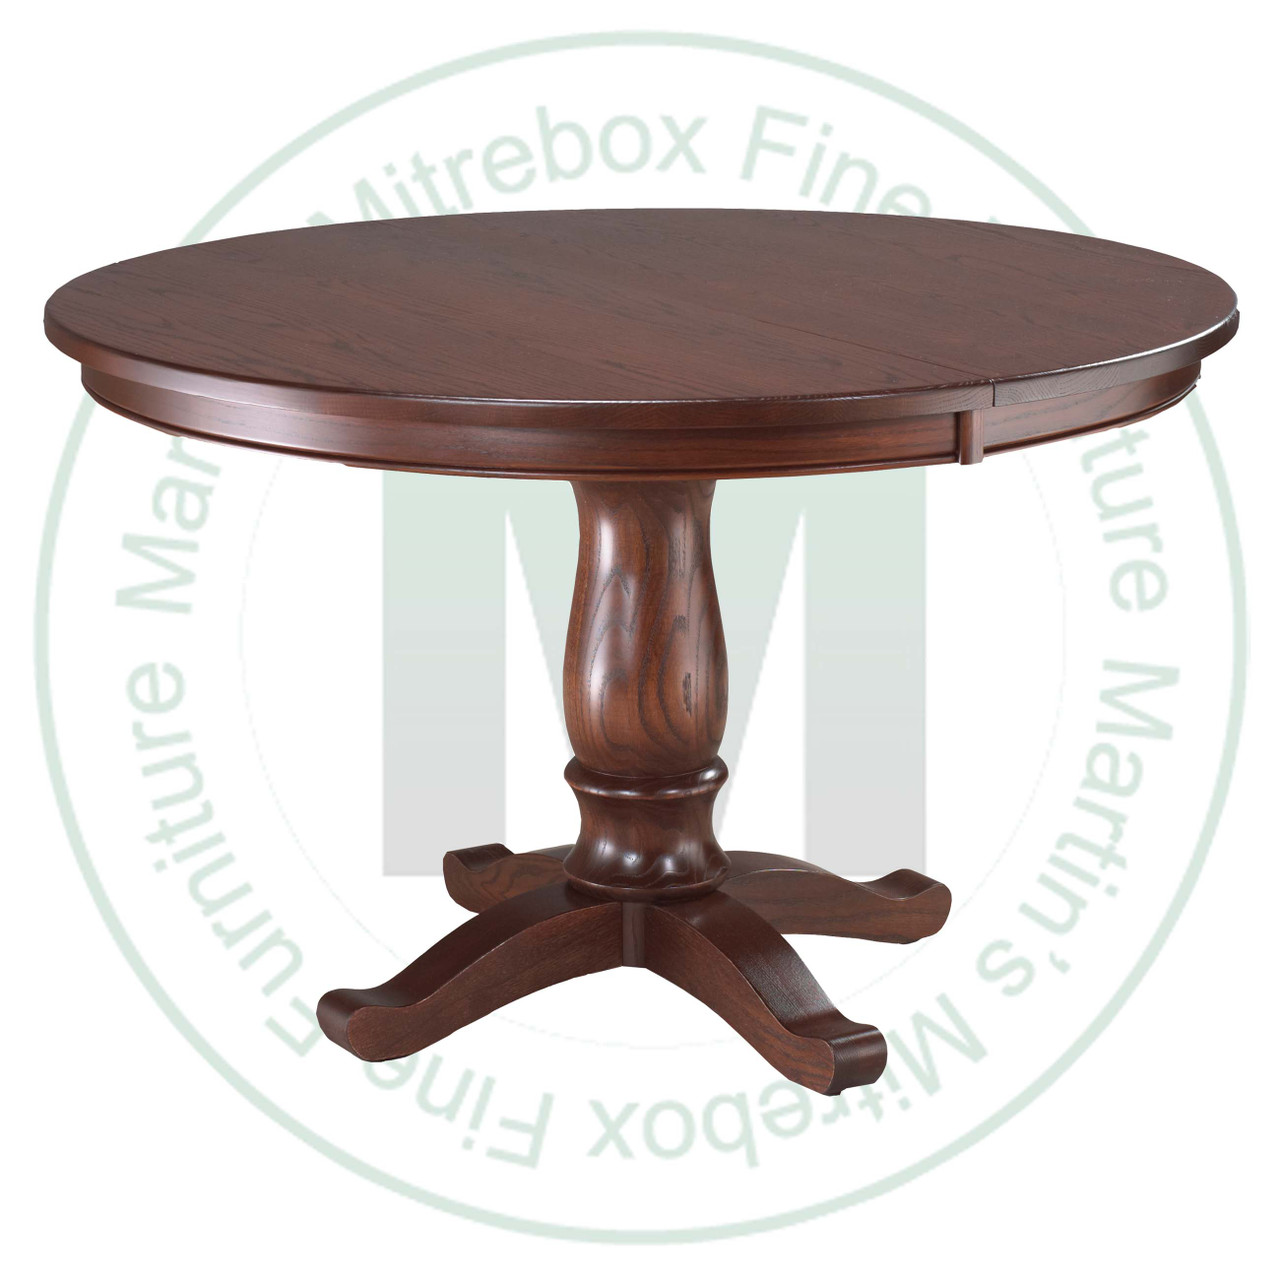 Wormy Maple Kimberly Crest Single Pedestal Table 36''D x 36''W x 30''H Round Solid Table